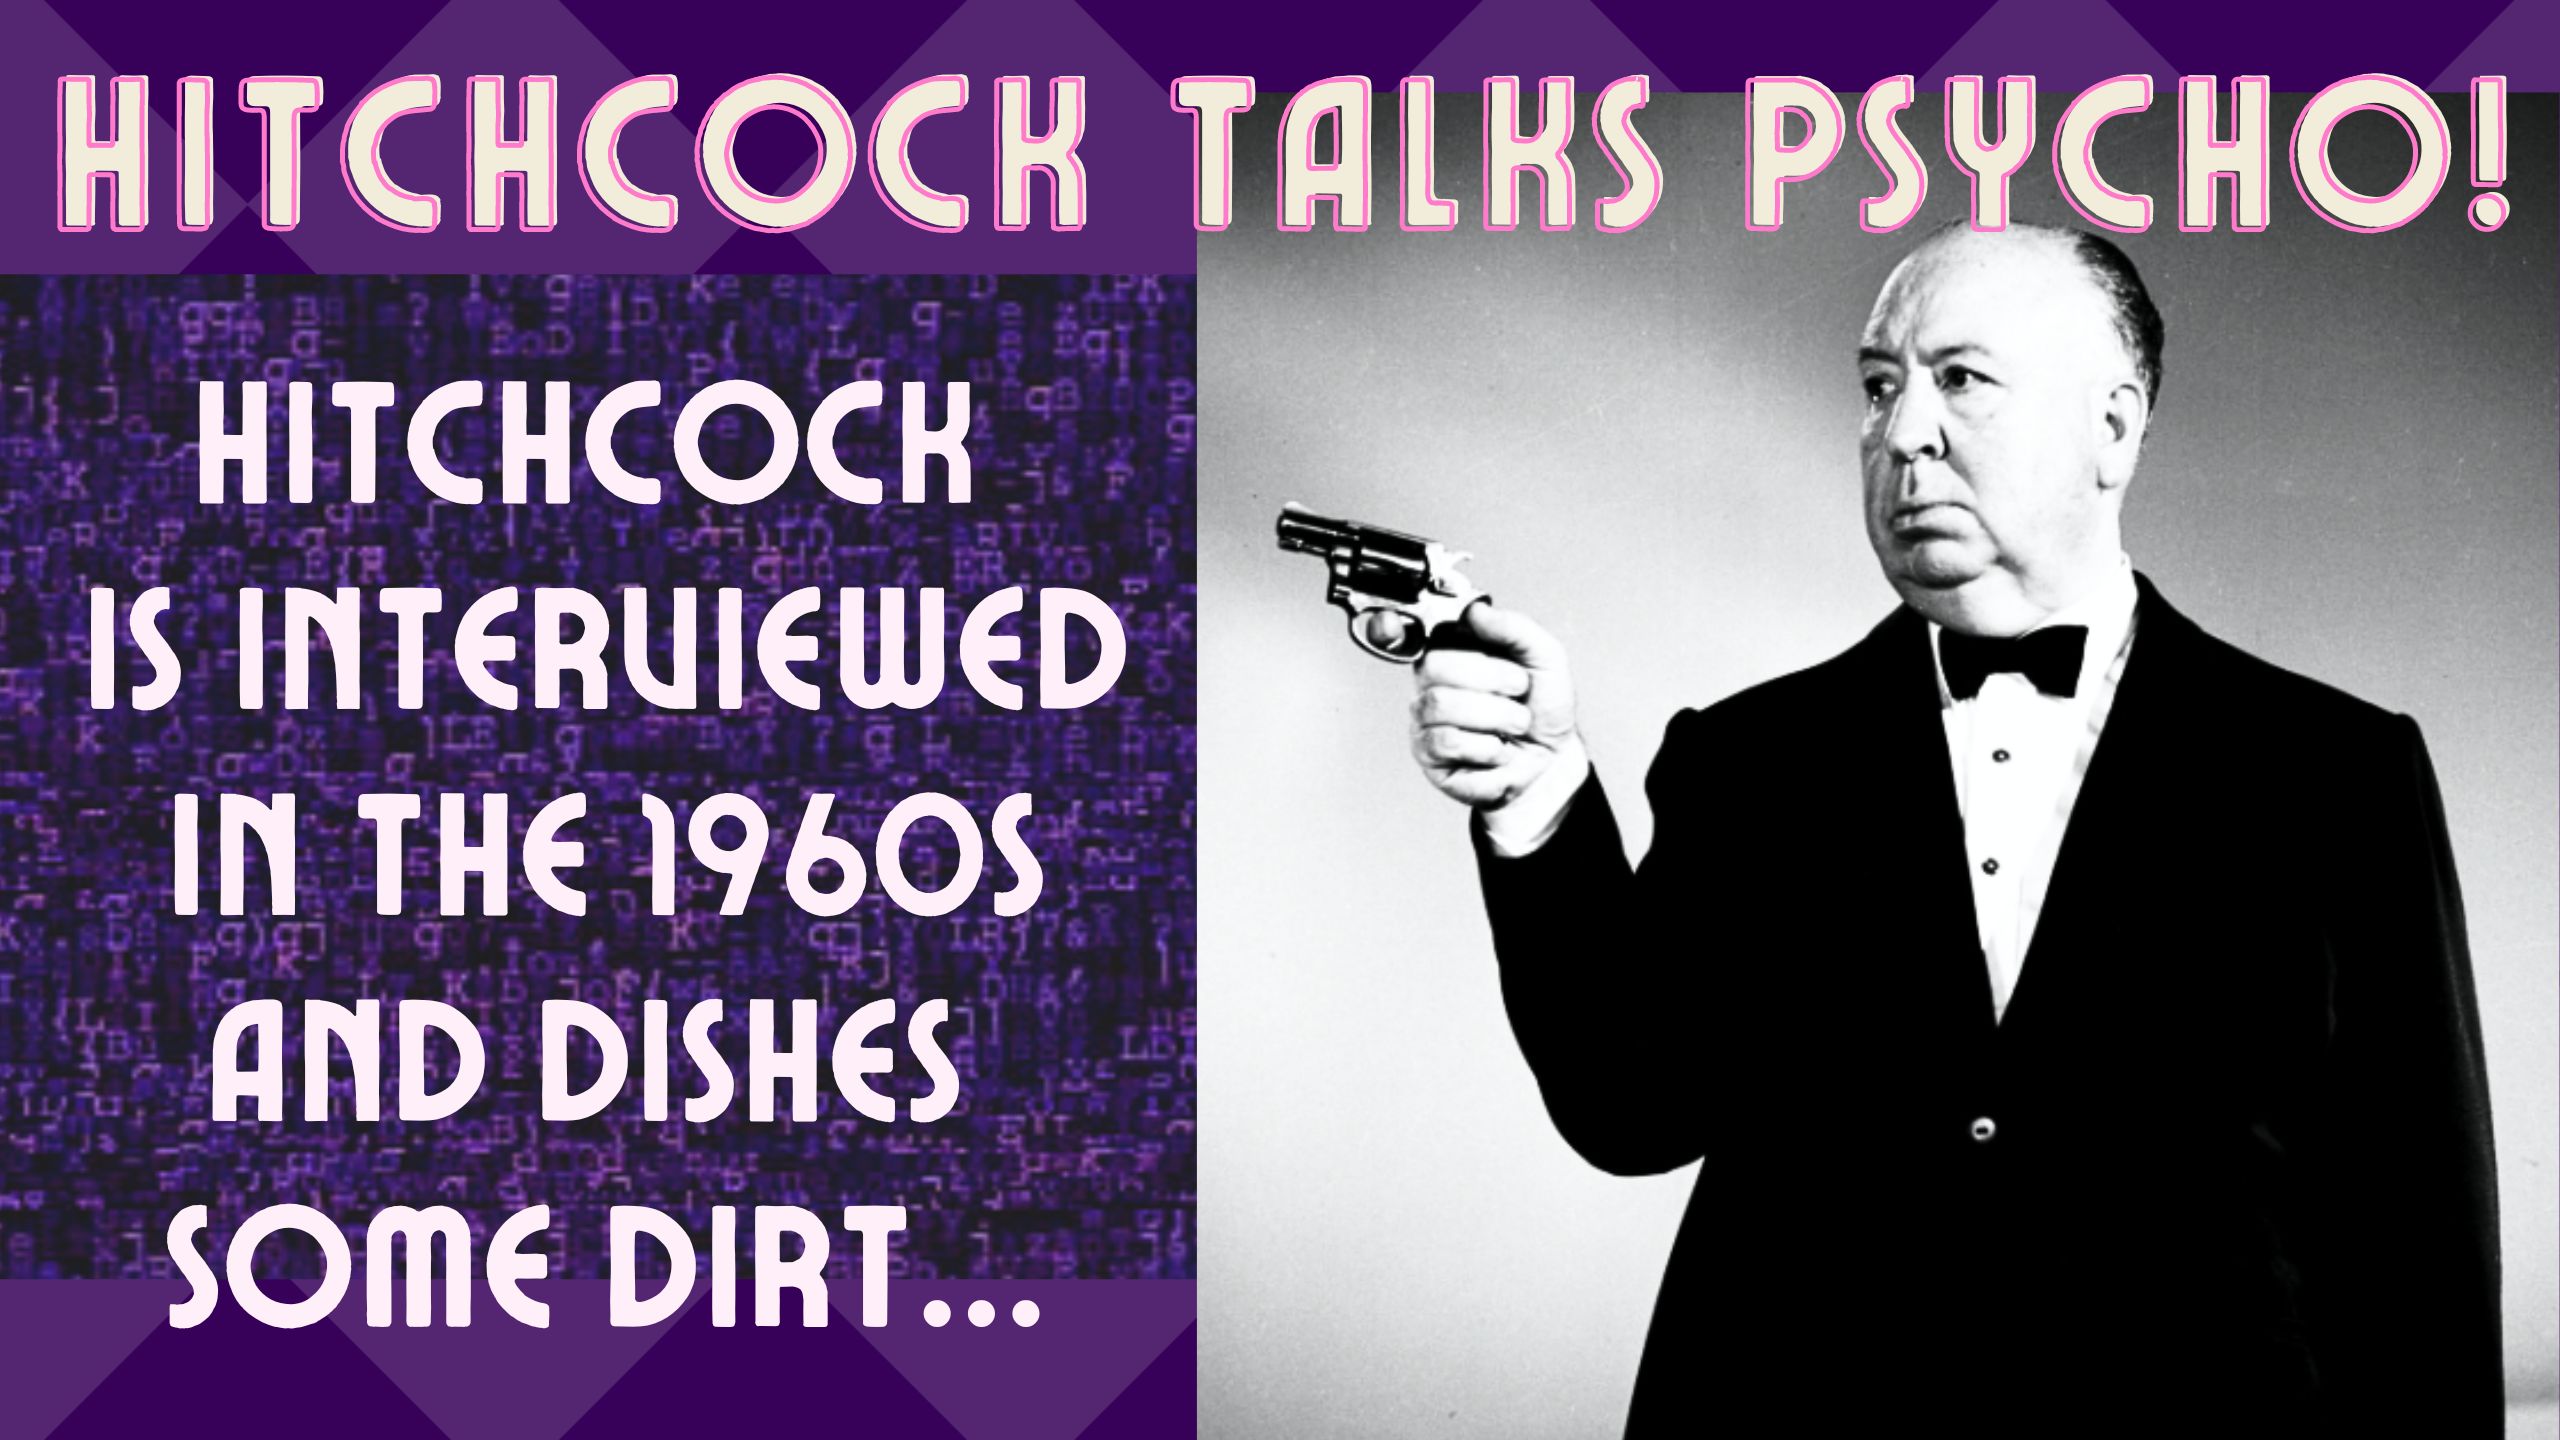 Alfred Hitchcock Talks About His Classic Movie PSYCHO! A Series of Interview Snippets